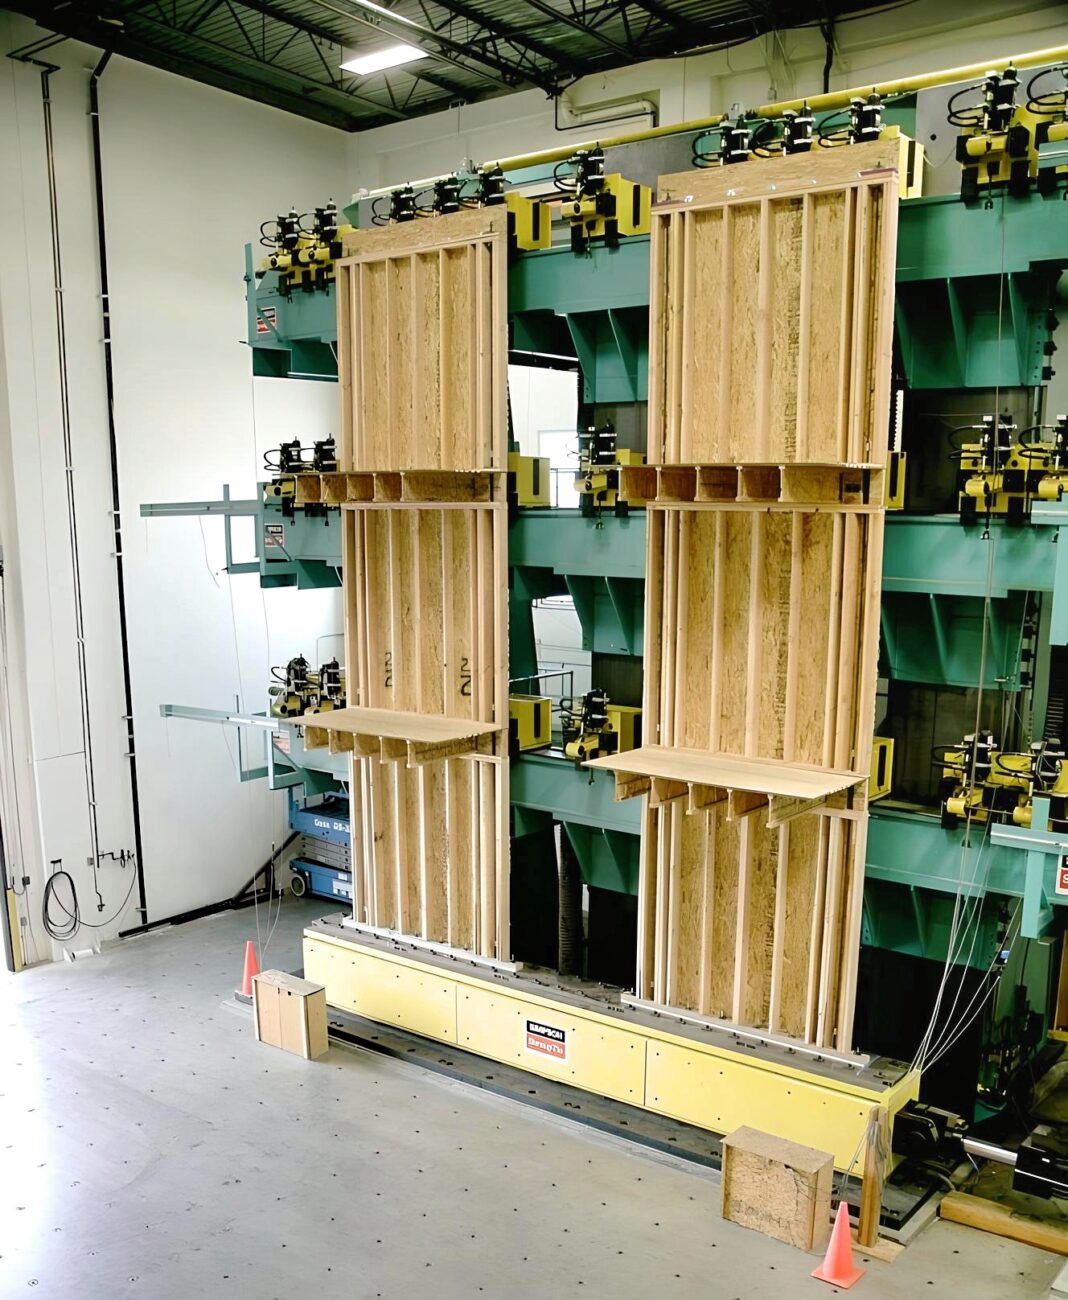 Inside the Tye Gilb Lab in Stockton, California, where the world's largest supplier of connectors are testing mass timber walls and panels under earthquake conditions. (Photo Credit: Supplied by Strong-Tie)